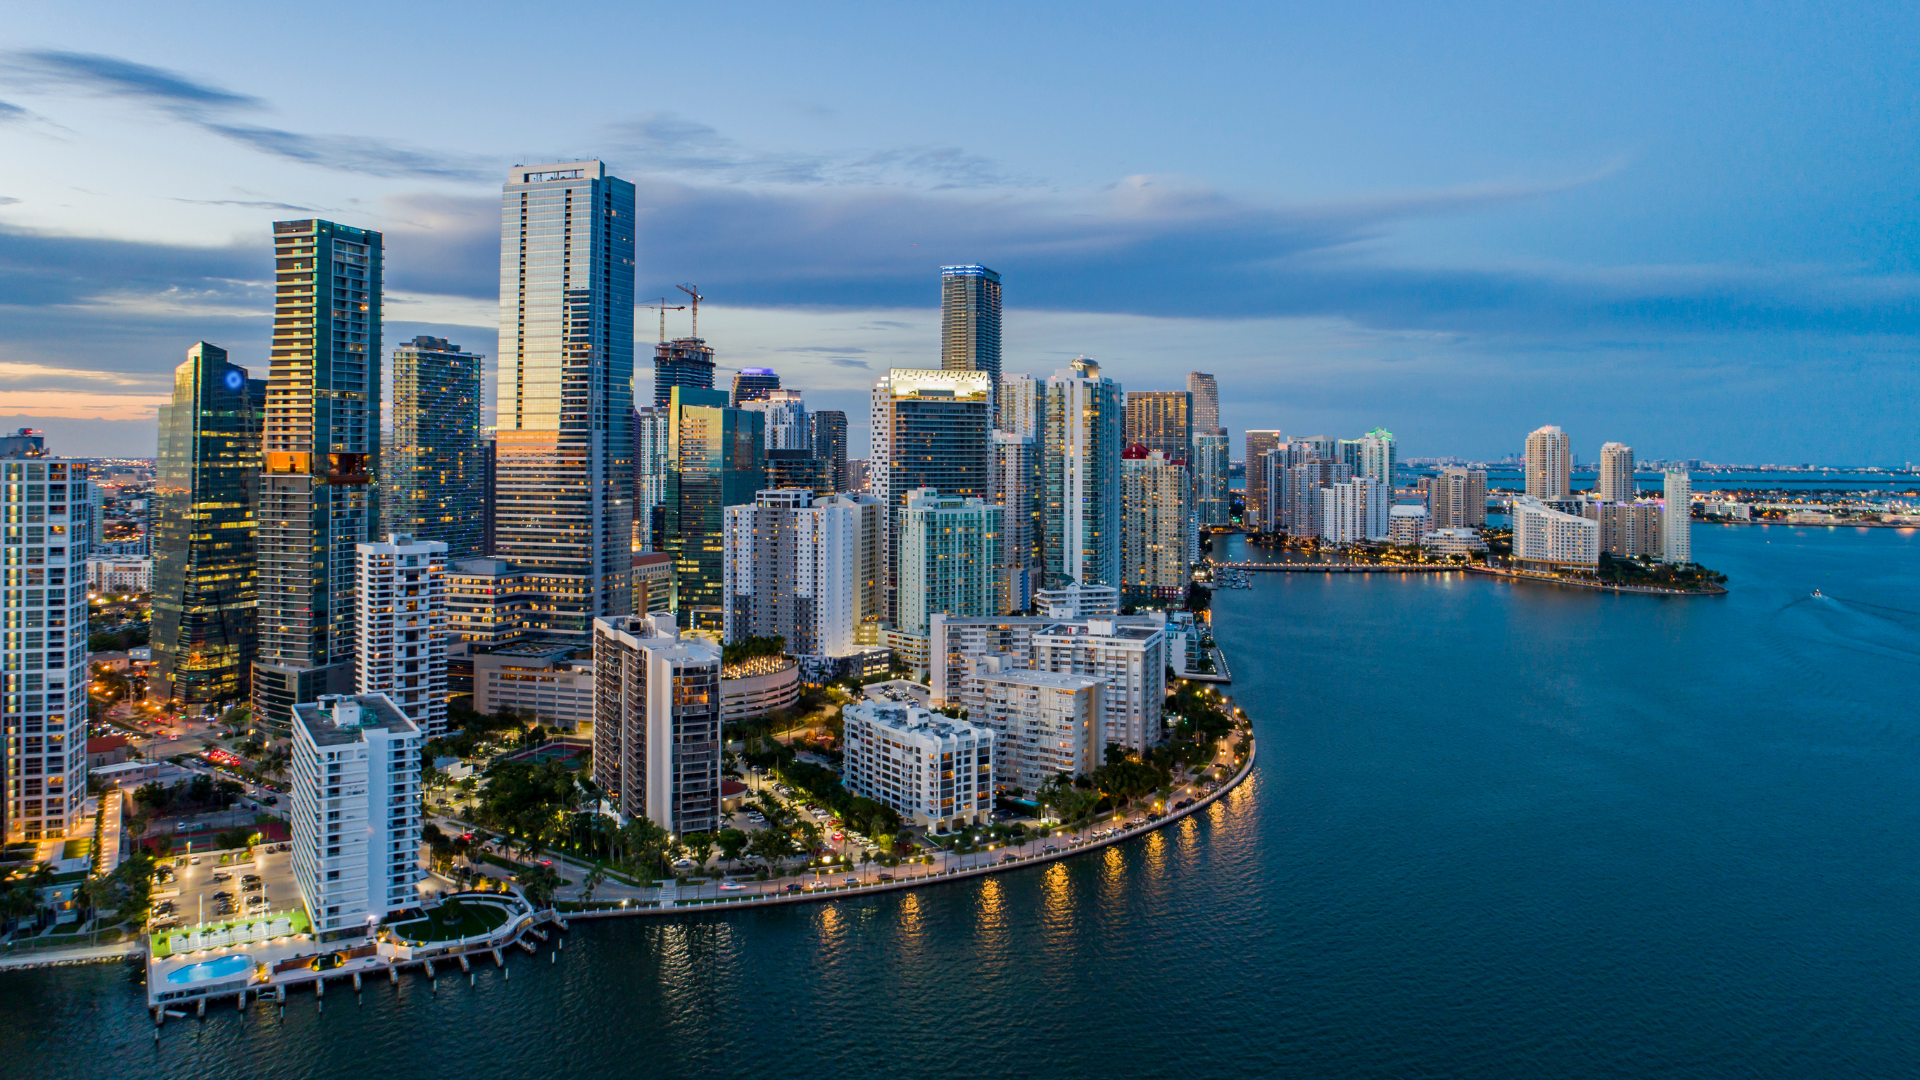 "Photo showing the iconic skyline of Brickell, Miami, featuring sleek and modern condominium towers against a backdrop of clear blue skies. The buildings exhibit contemporary architectural designs with glass facades and distinctive shapes, symbolizing urban sophistication and luxury living in the heart of Miami's financial district."